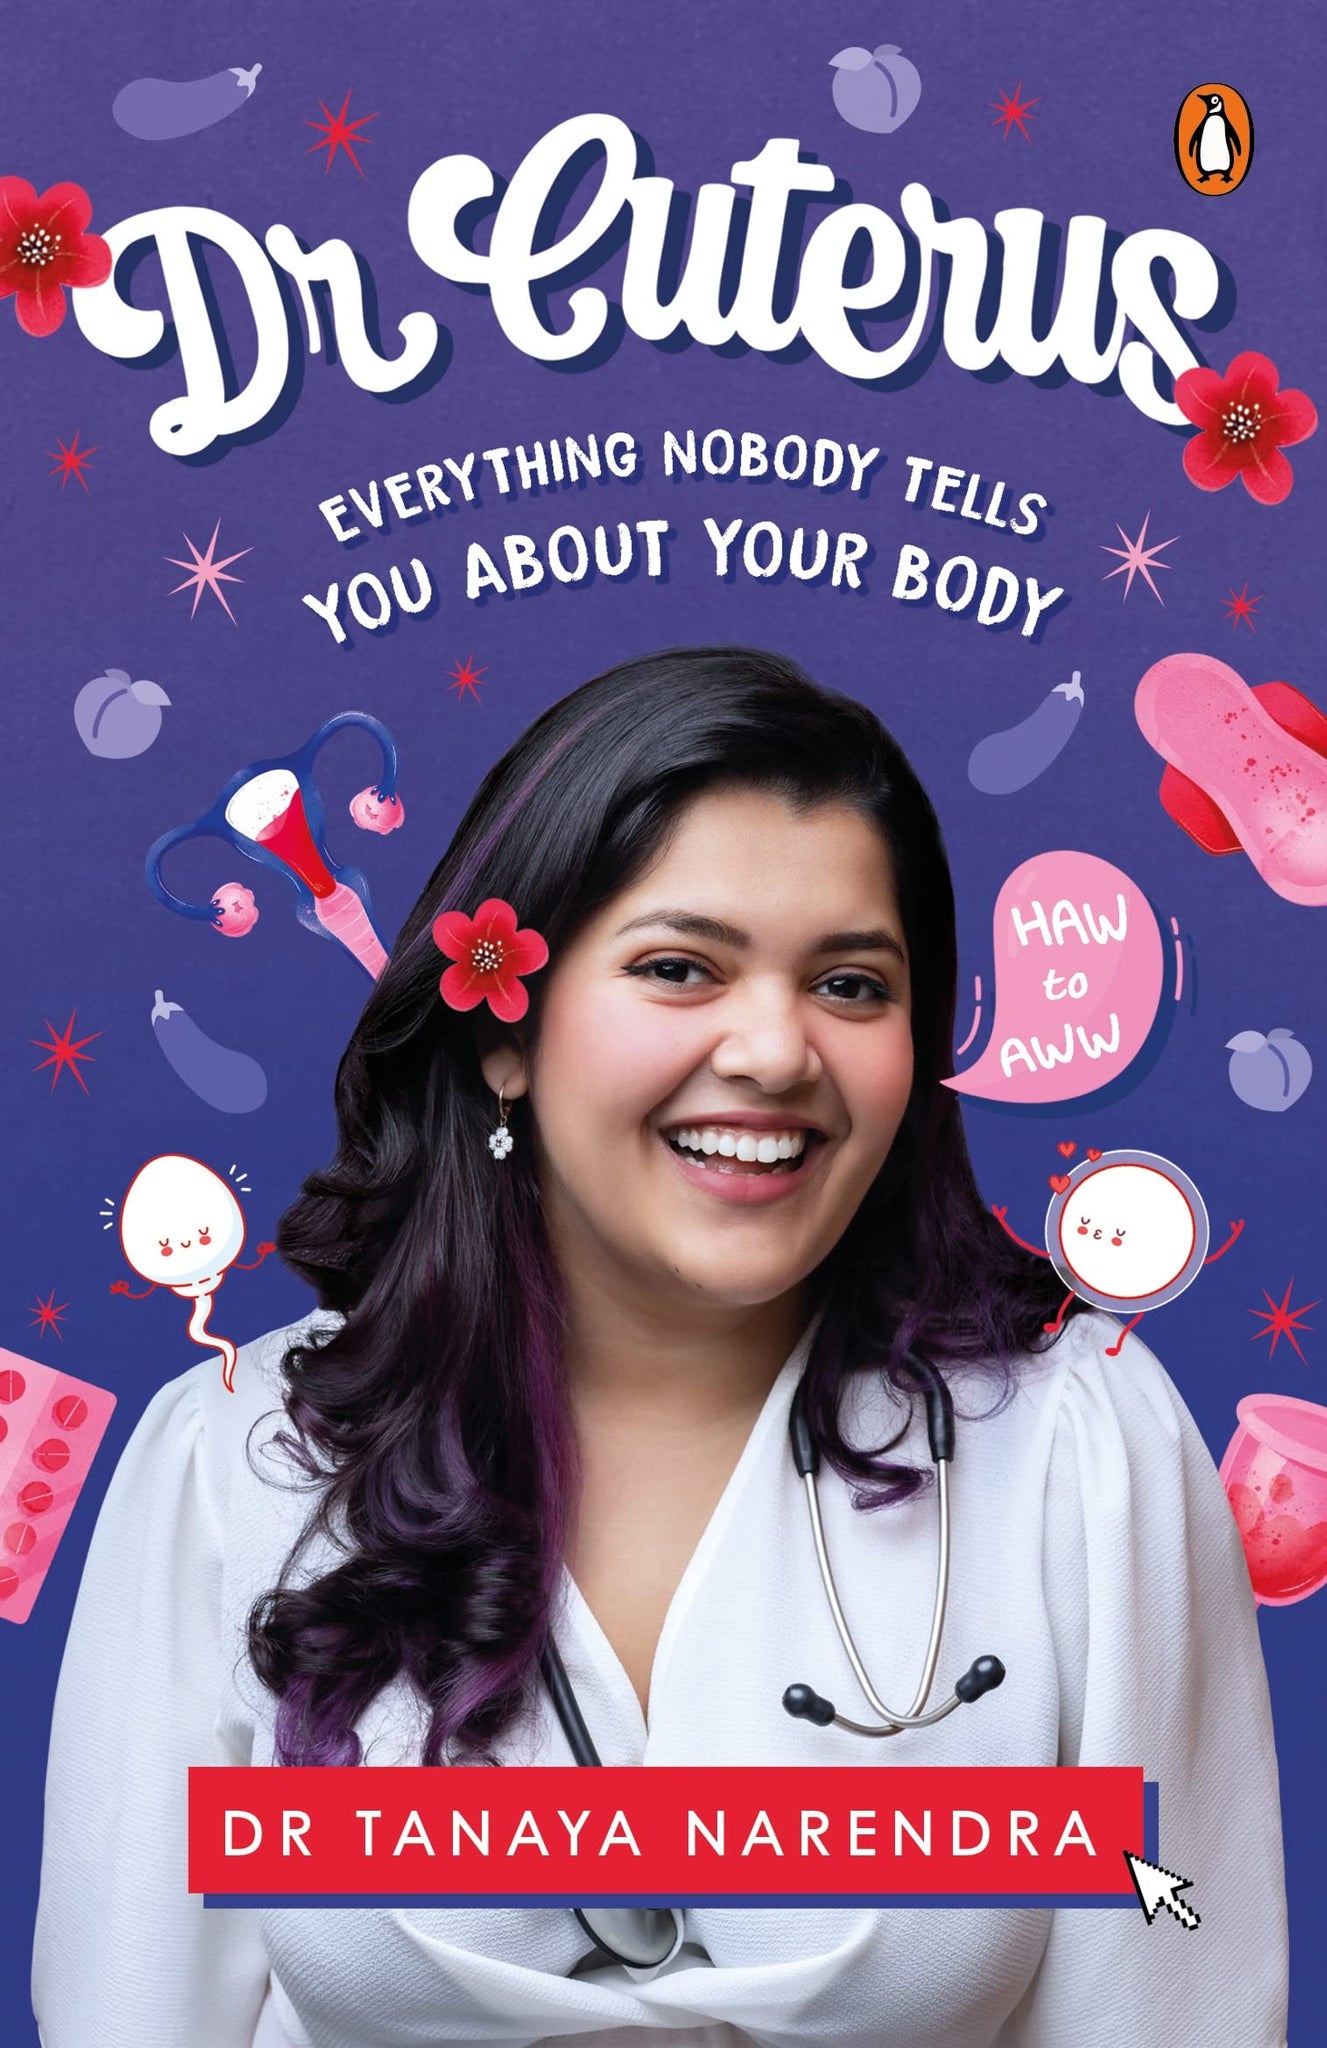 Dr Cuterus: Everything Nobody Tells You About Your Body